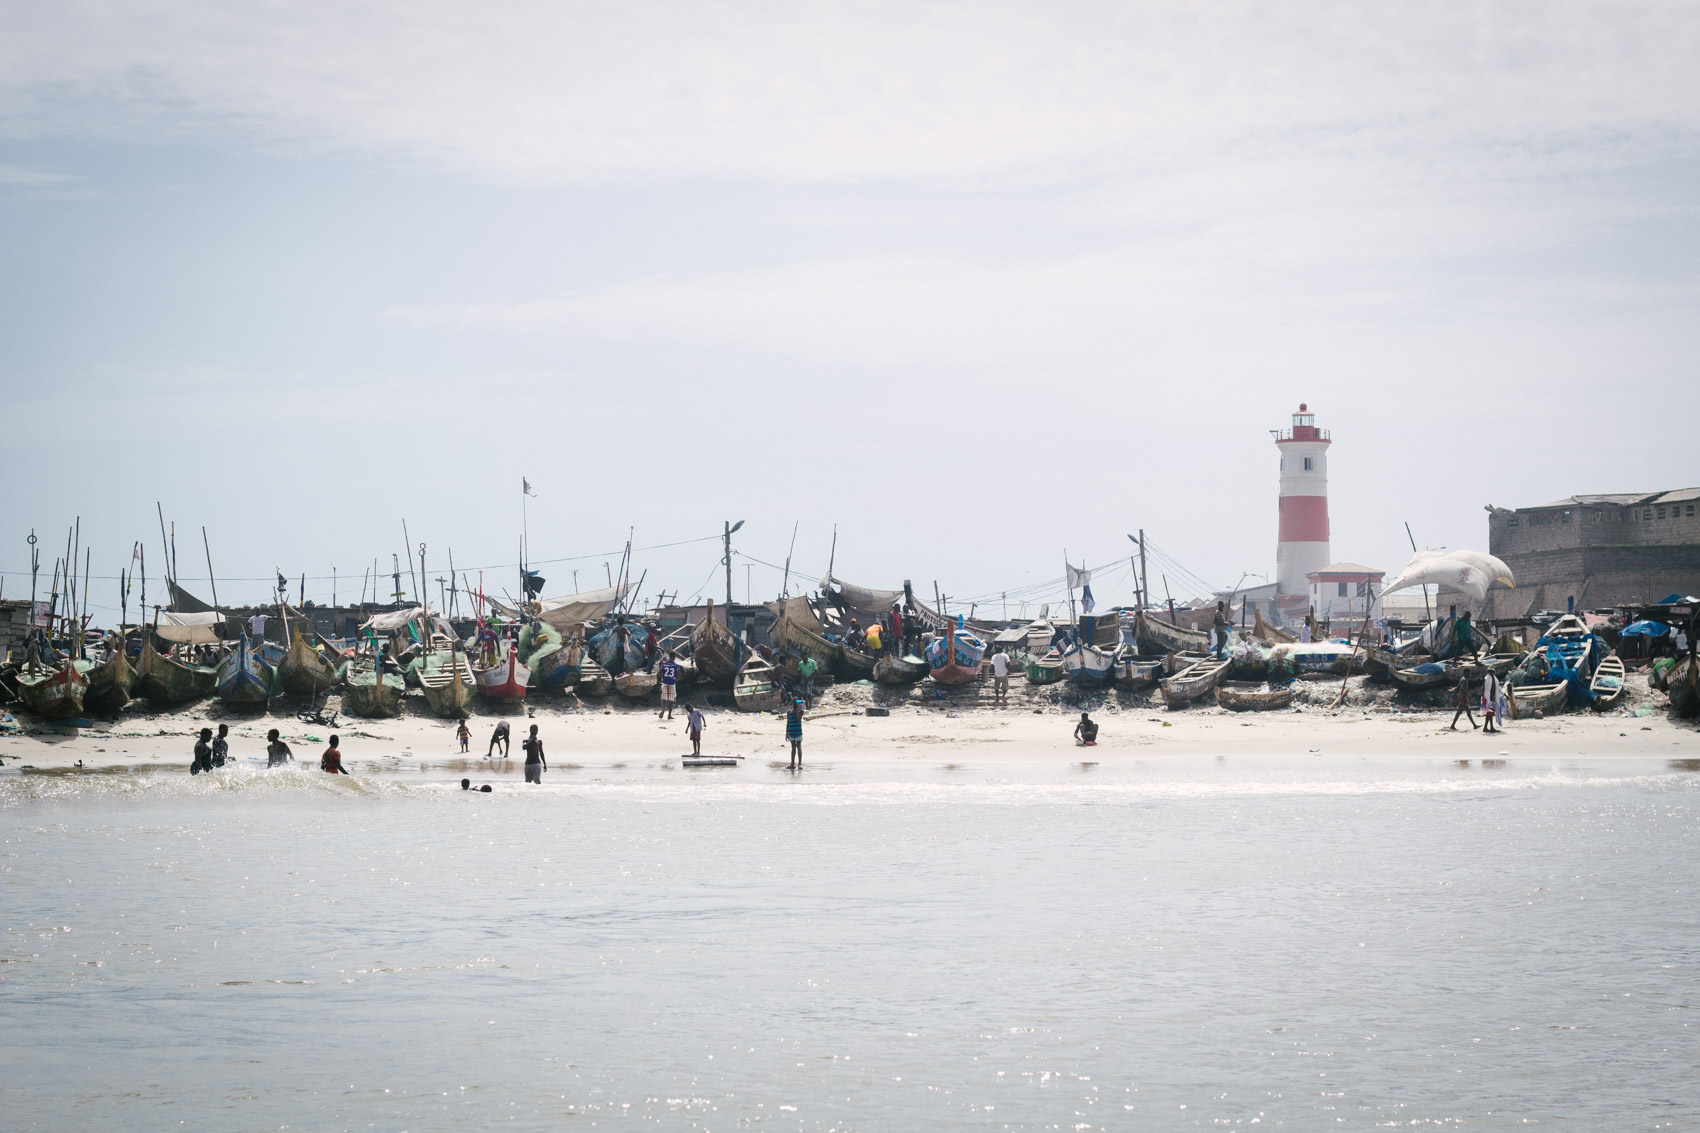 A glimpse into exploring Jamestown - a historically rich fishing community in Accra, Ghana.